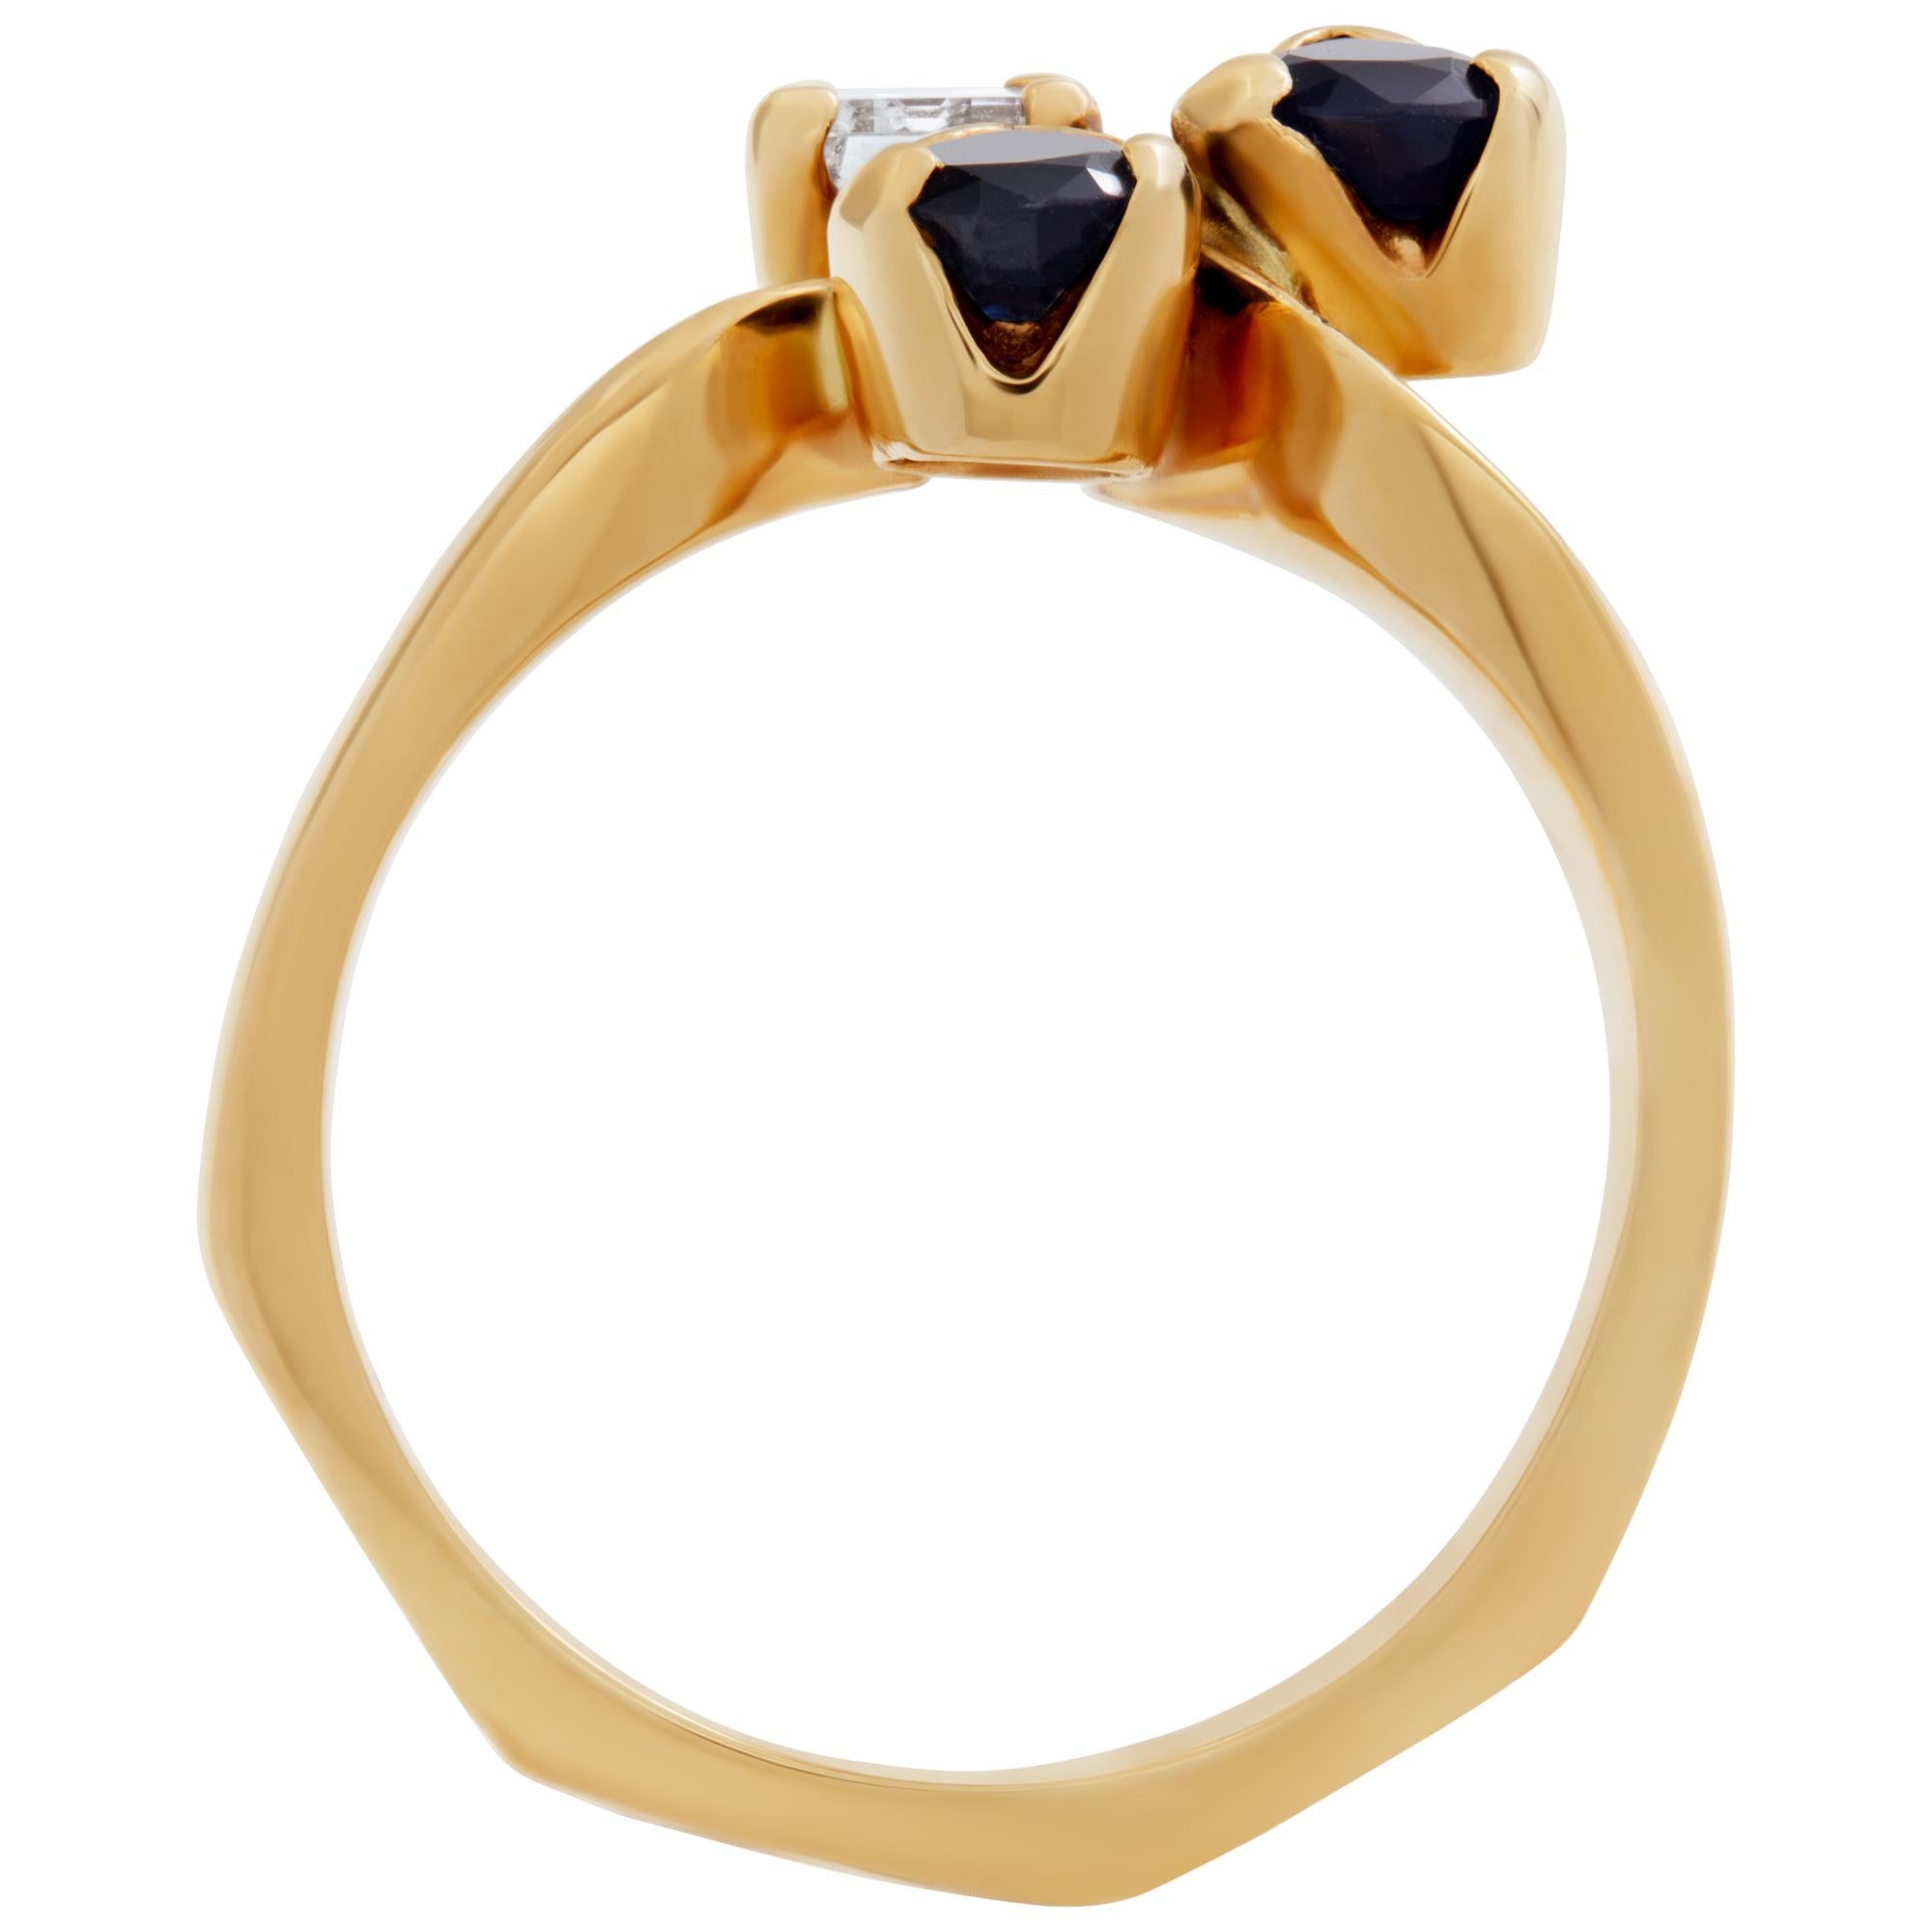 Diamond & Sapphire Ring in 14k Yellow Gold In Excellent Condition For Sale In Surfside, FL